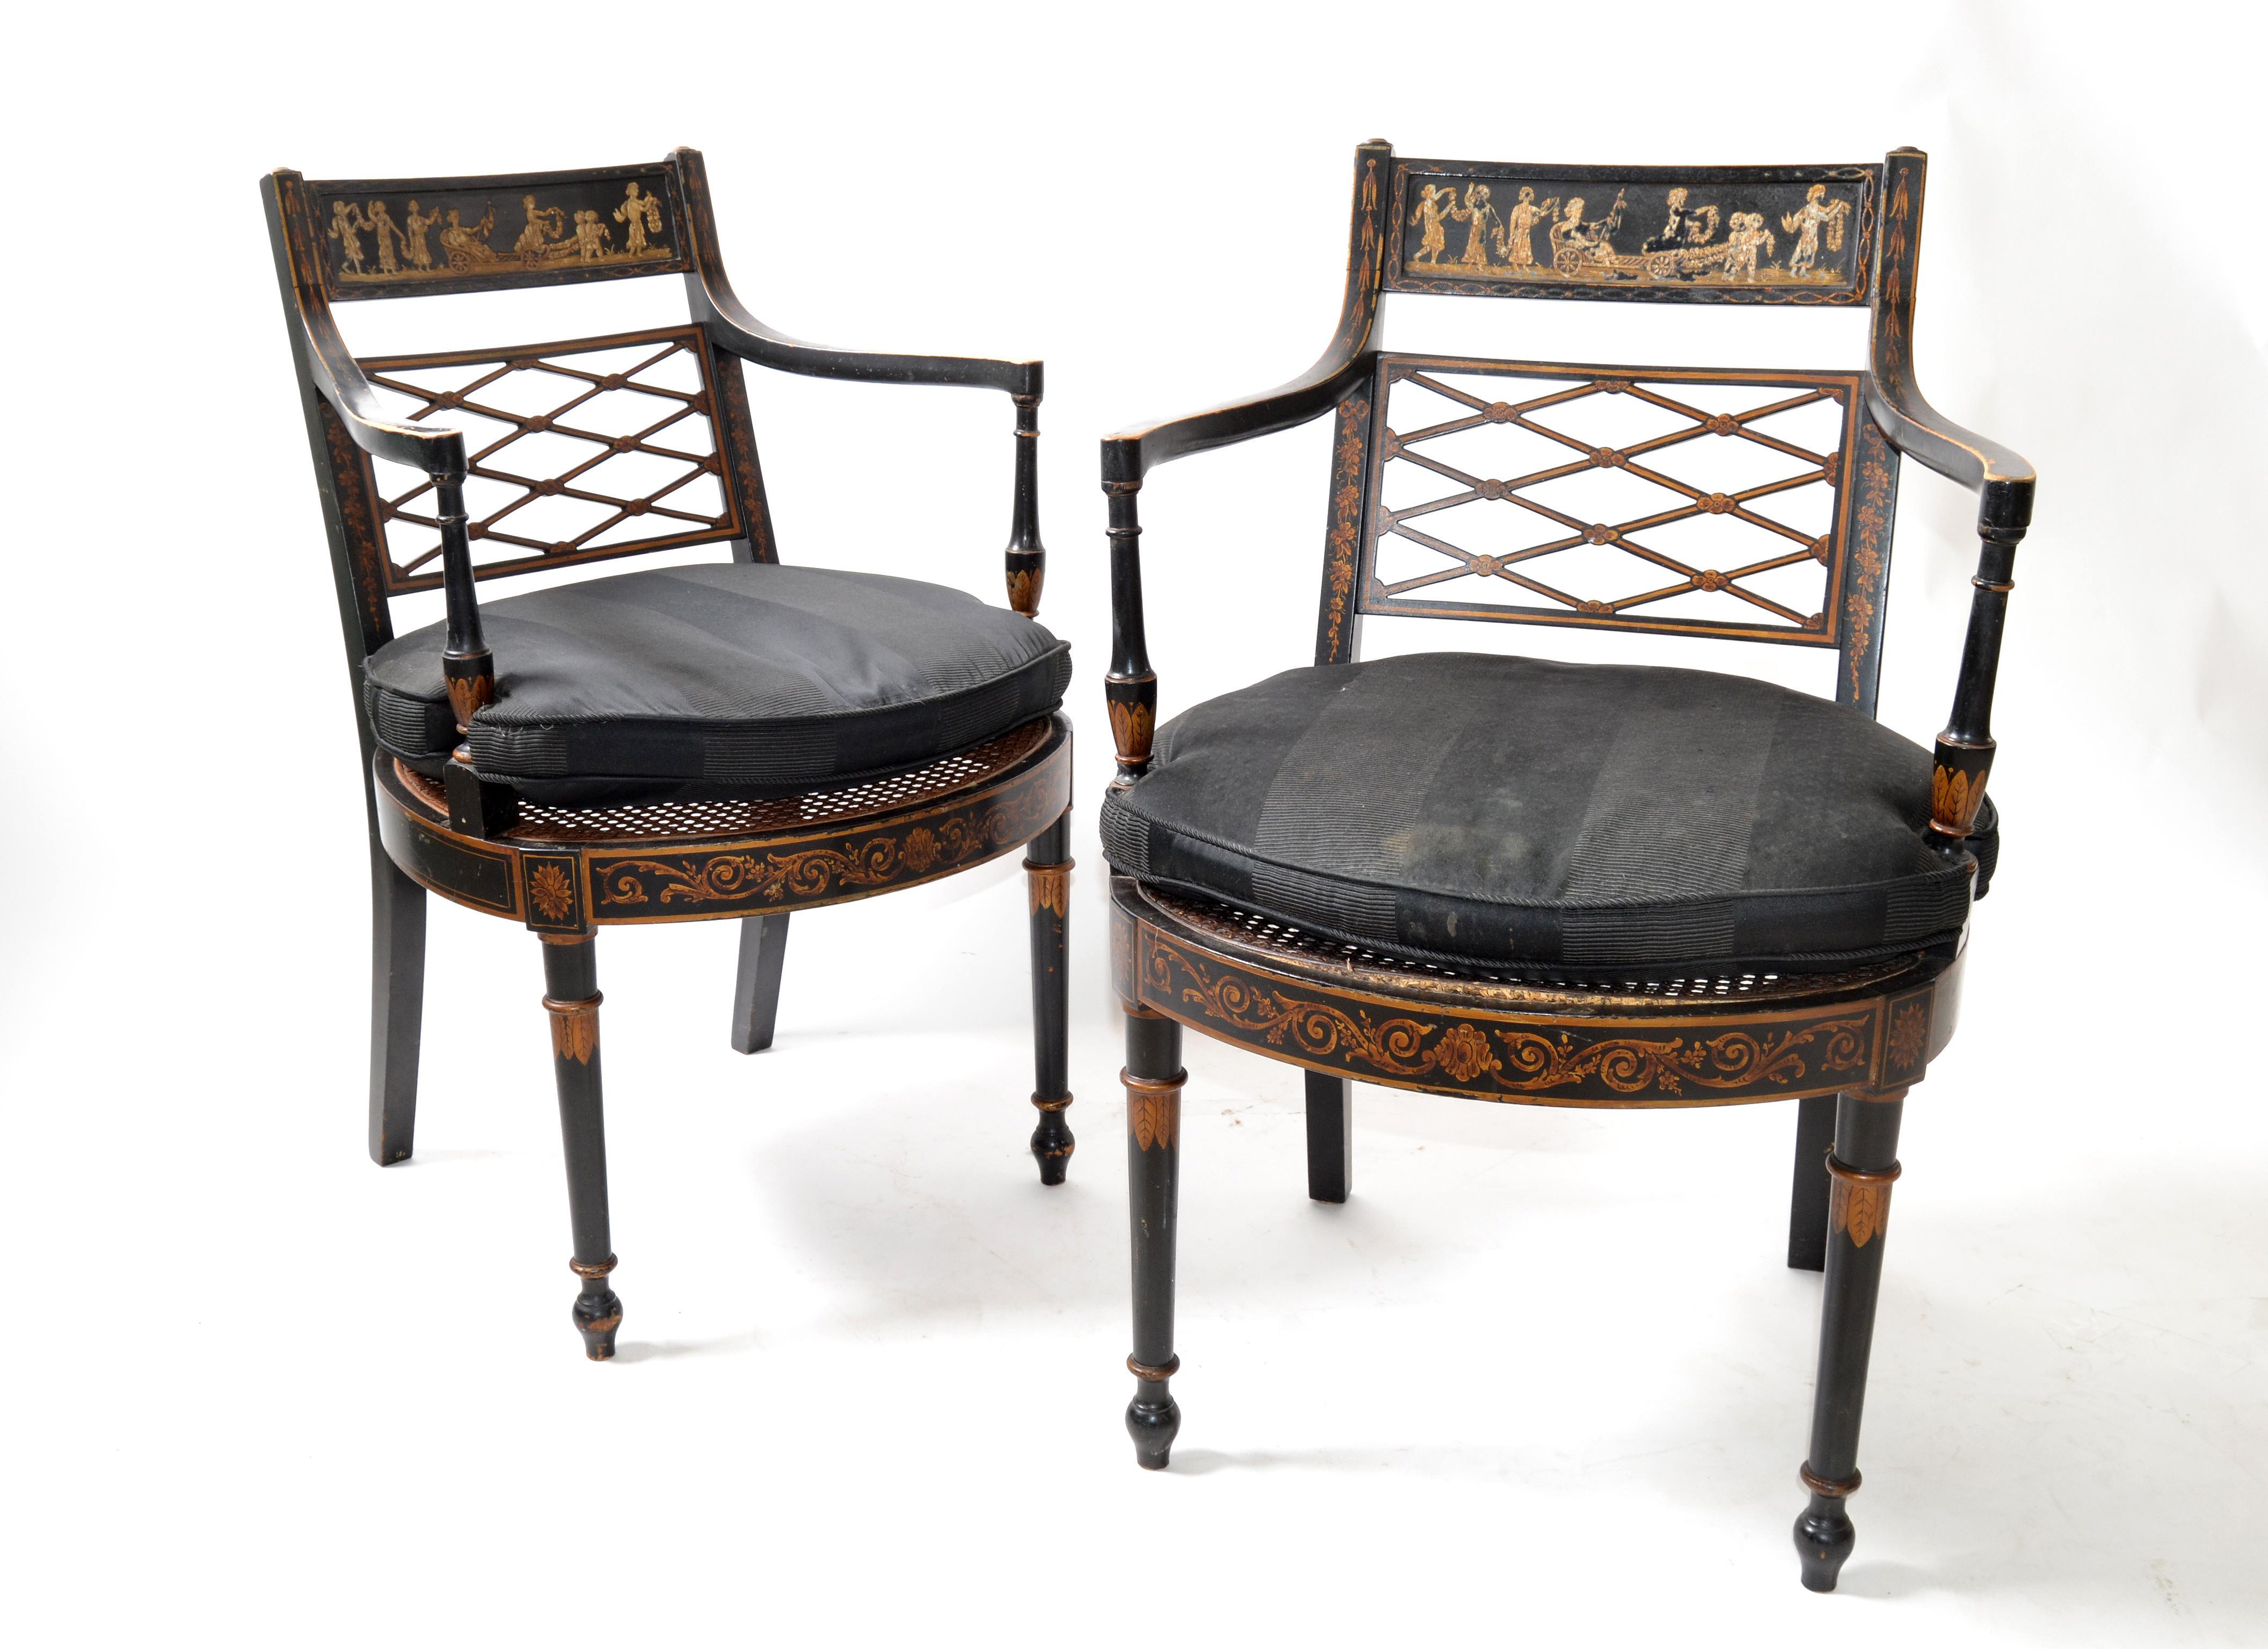 Hand-Carved Asian Modern Antique Armchairs Black Lacquered & Gold Finish Cane Seat, Pair For Sale